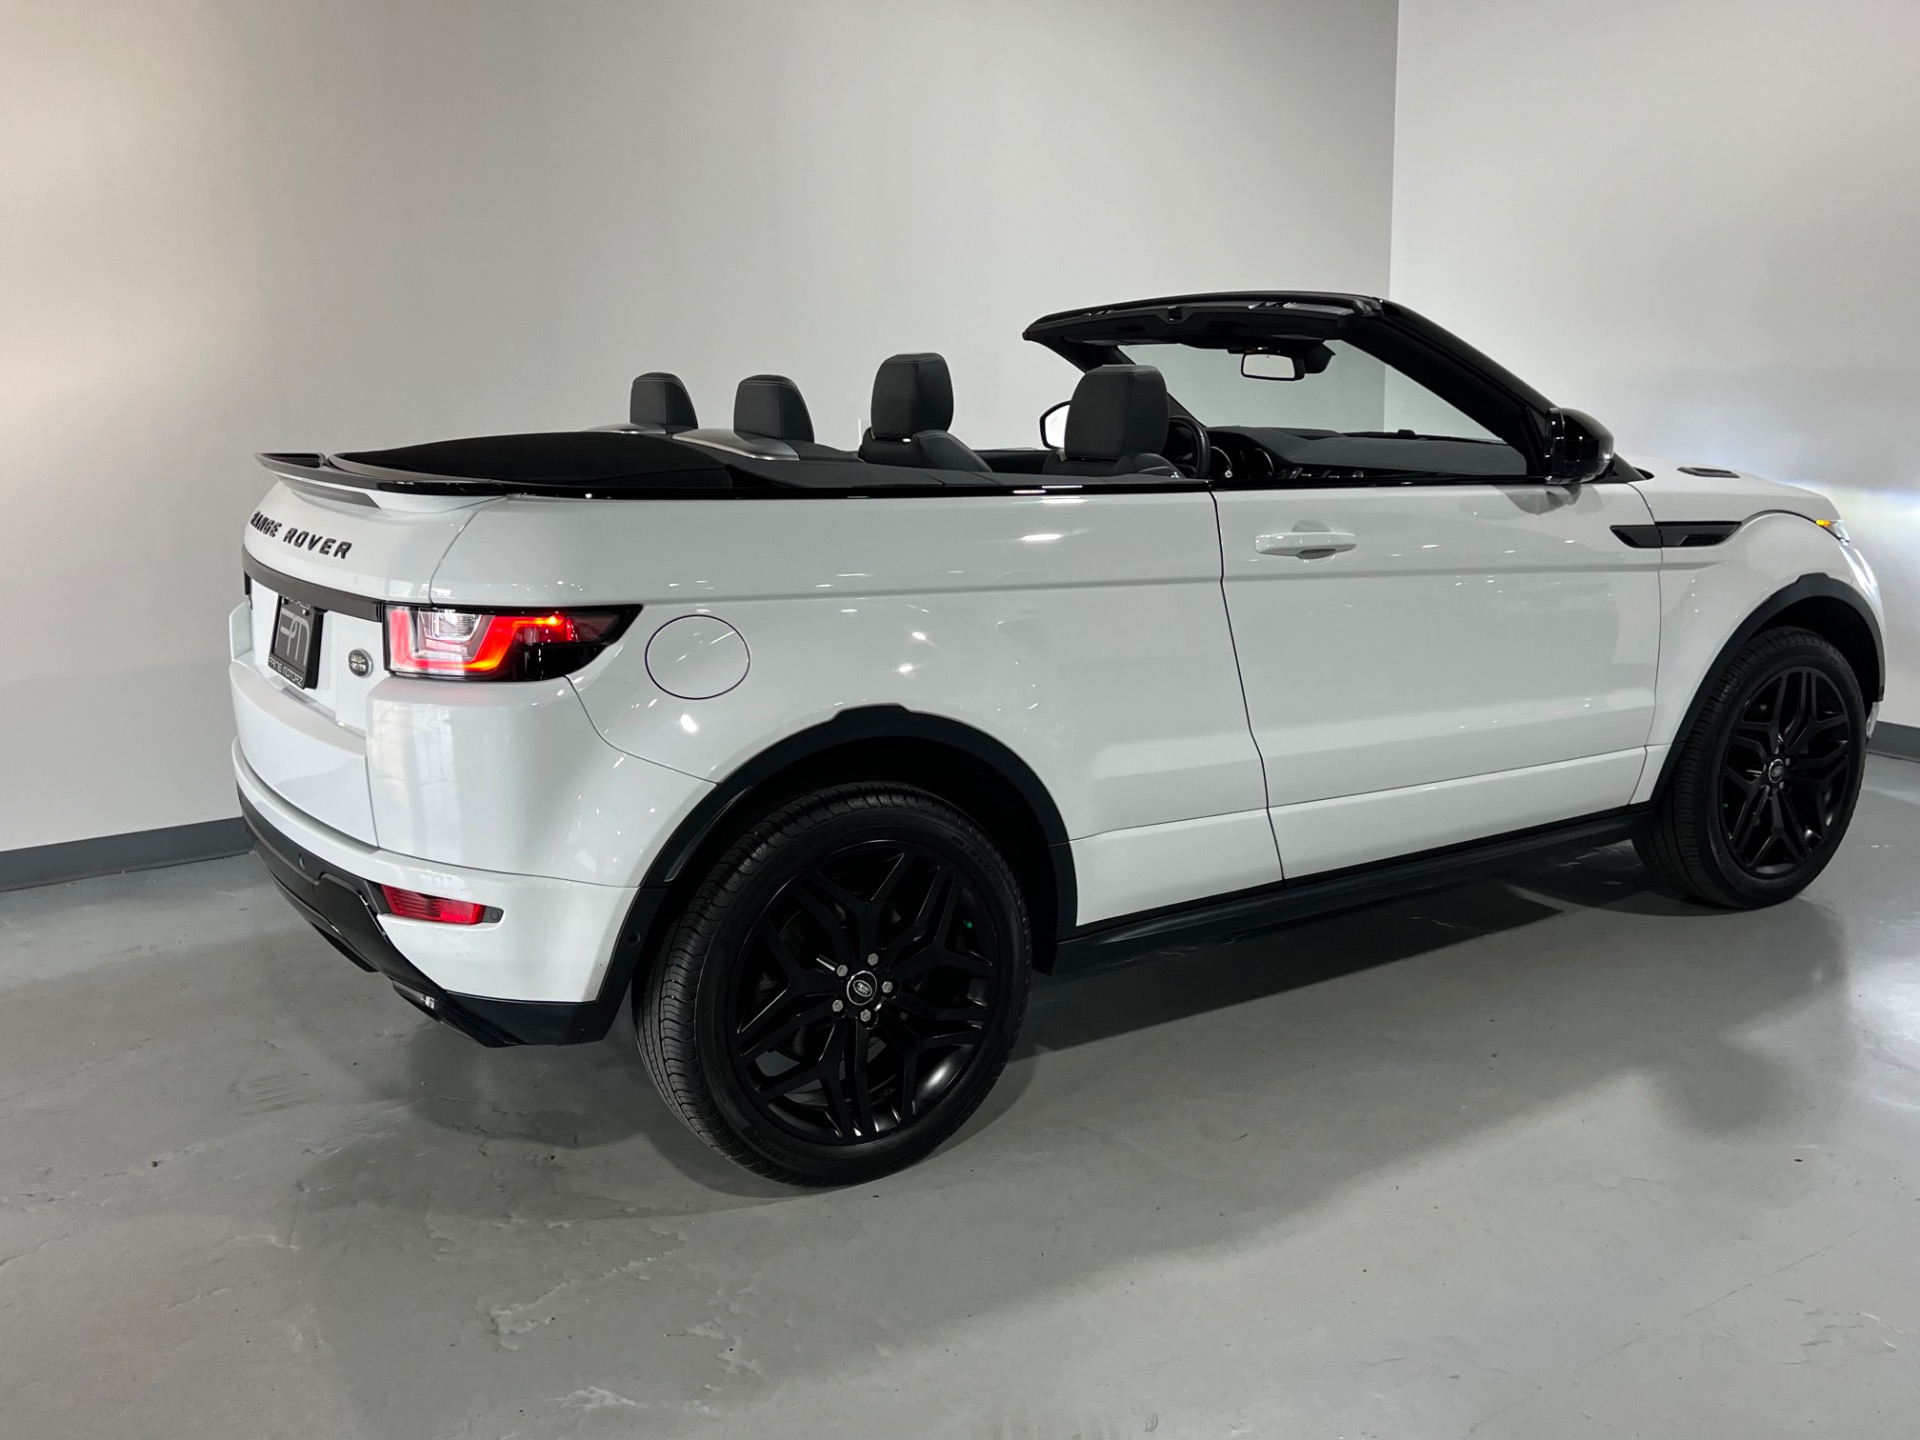 Used 2019 Fuji White Land Evoque For Convertible Rover HSE Sale | (Sold) Dynamic Range 2DR Prime Motorz HSE #4387 AWD Rover DYNAMIC Stock